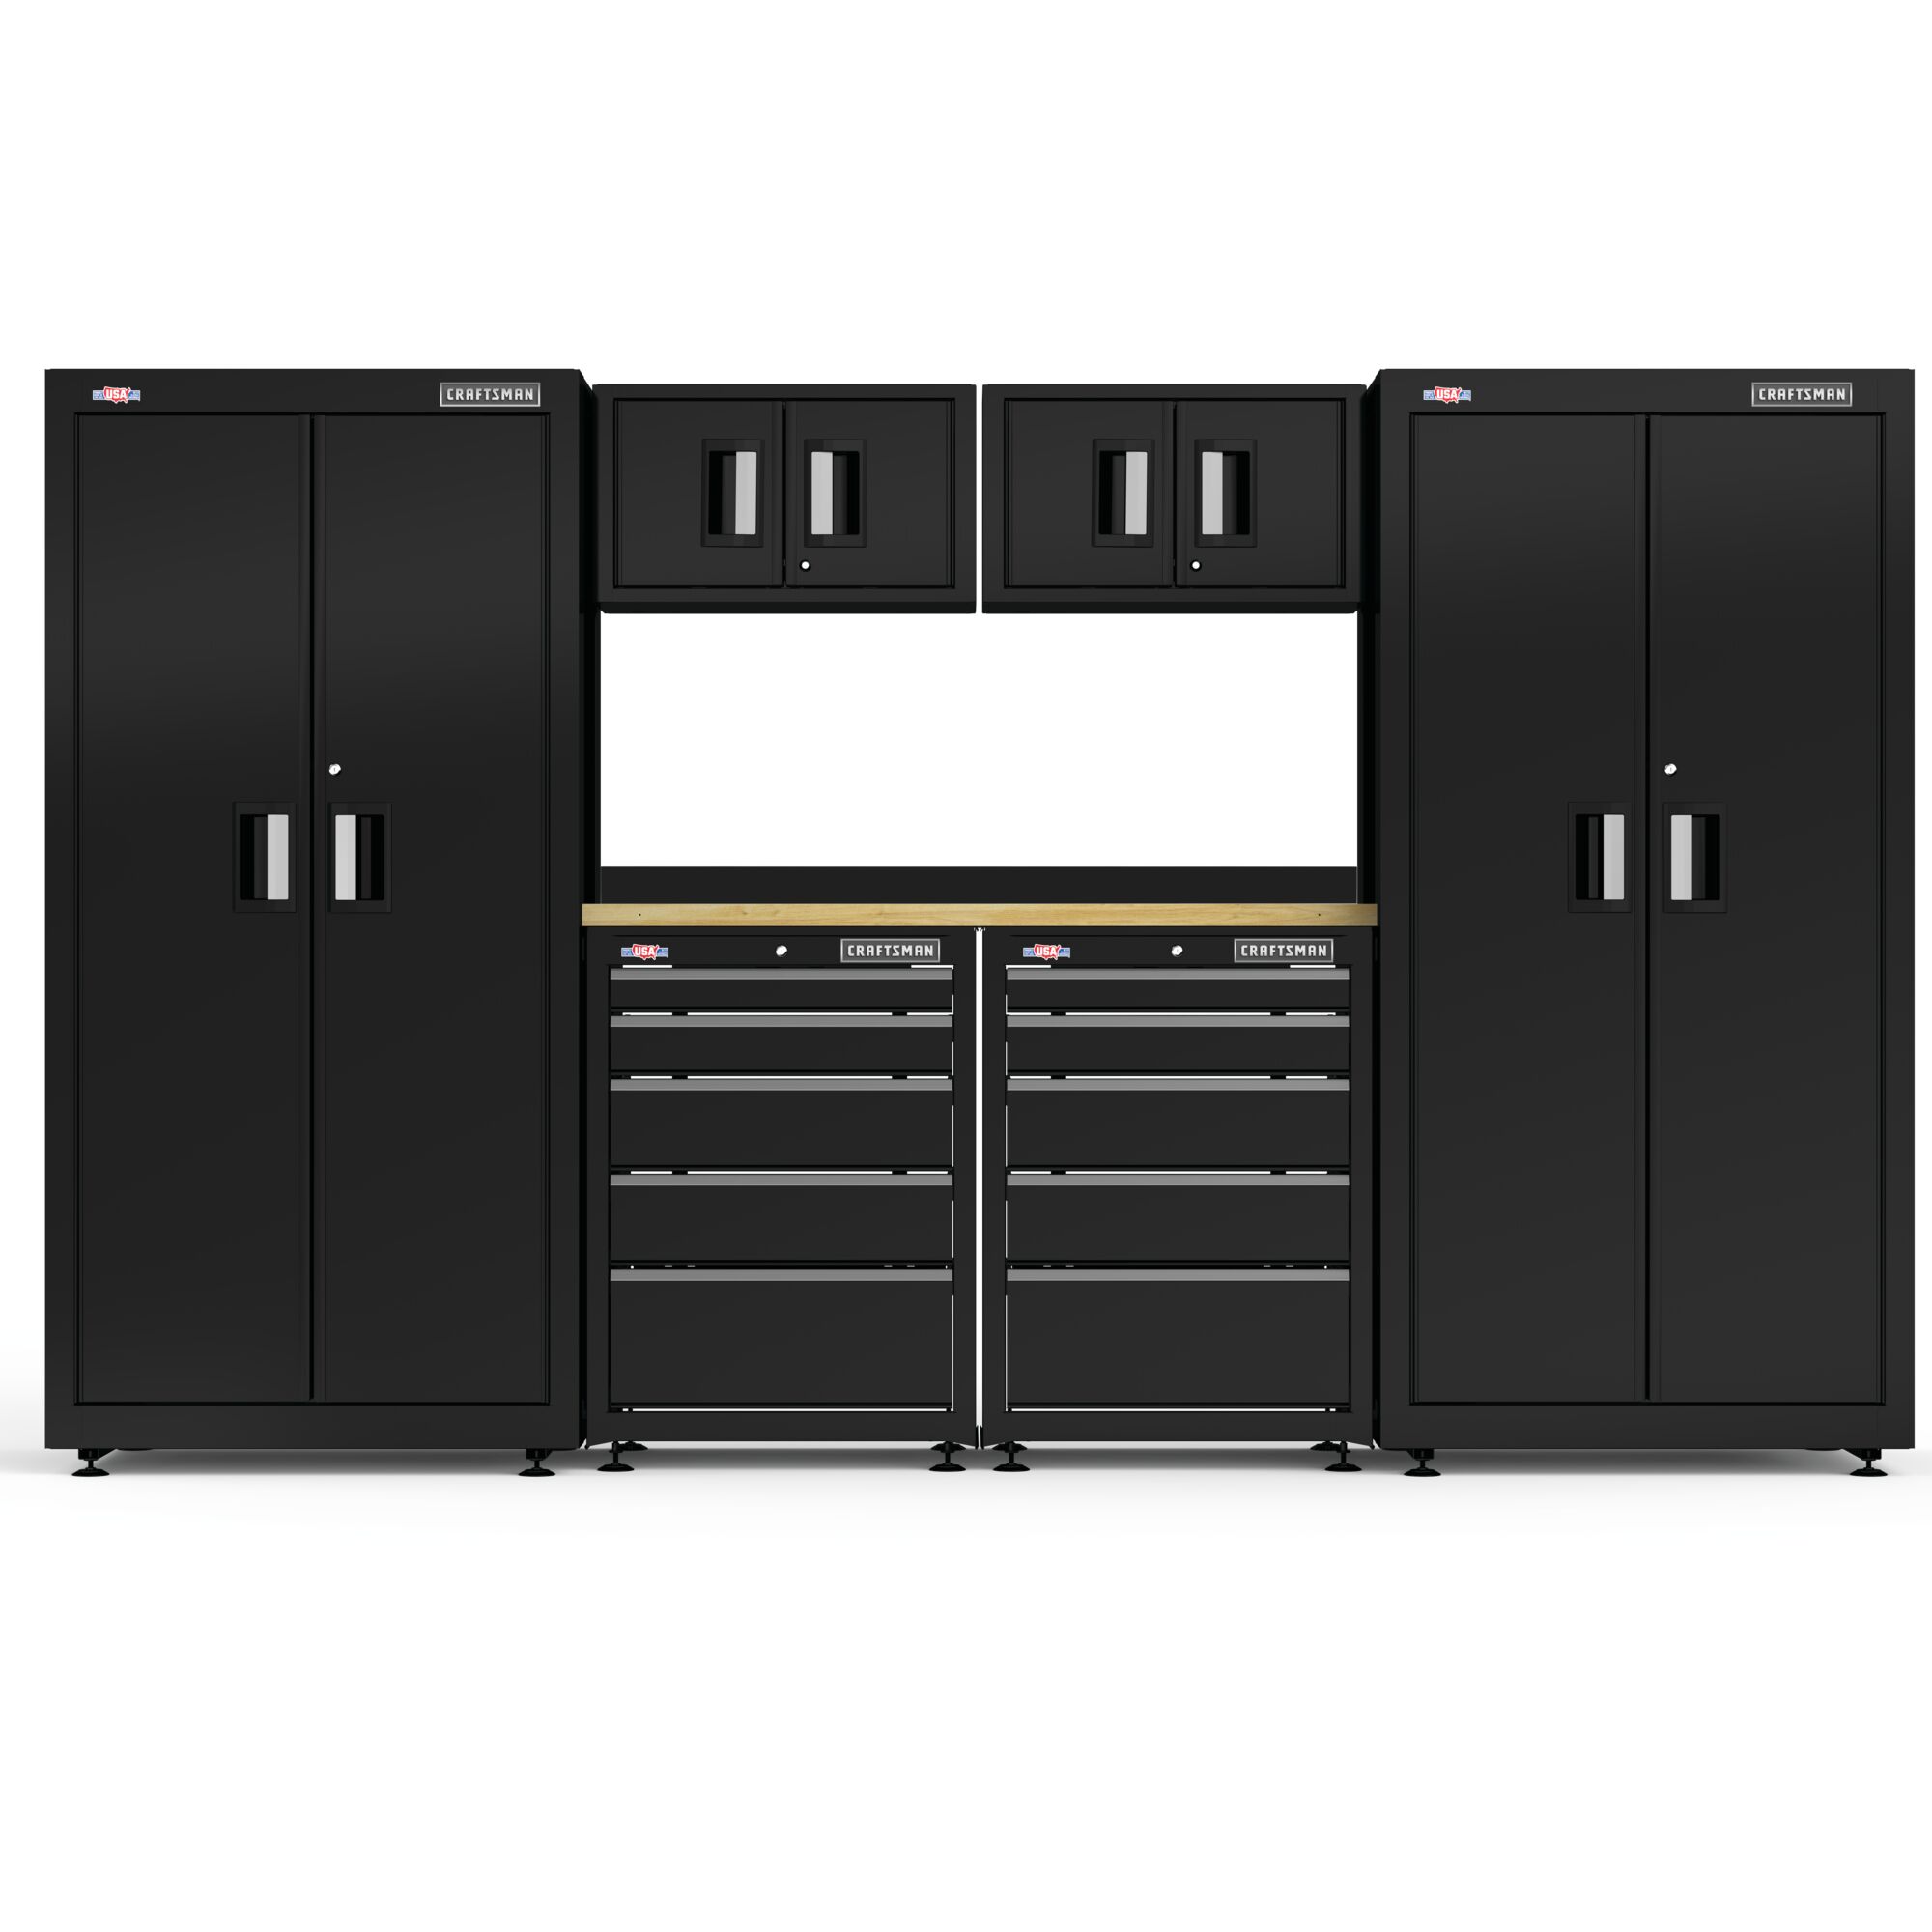 View of CRAFTSMAN Storage: Cabinets & Chests on white background